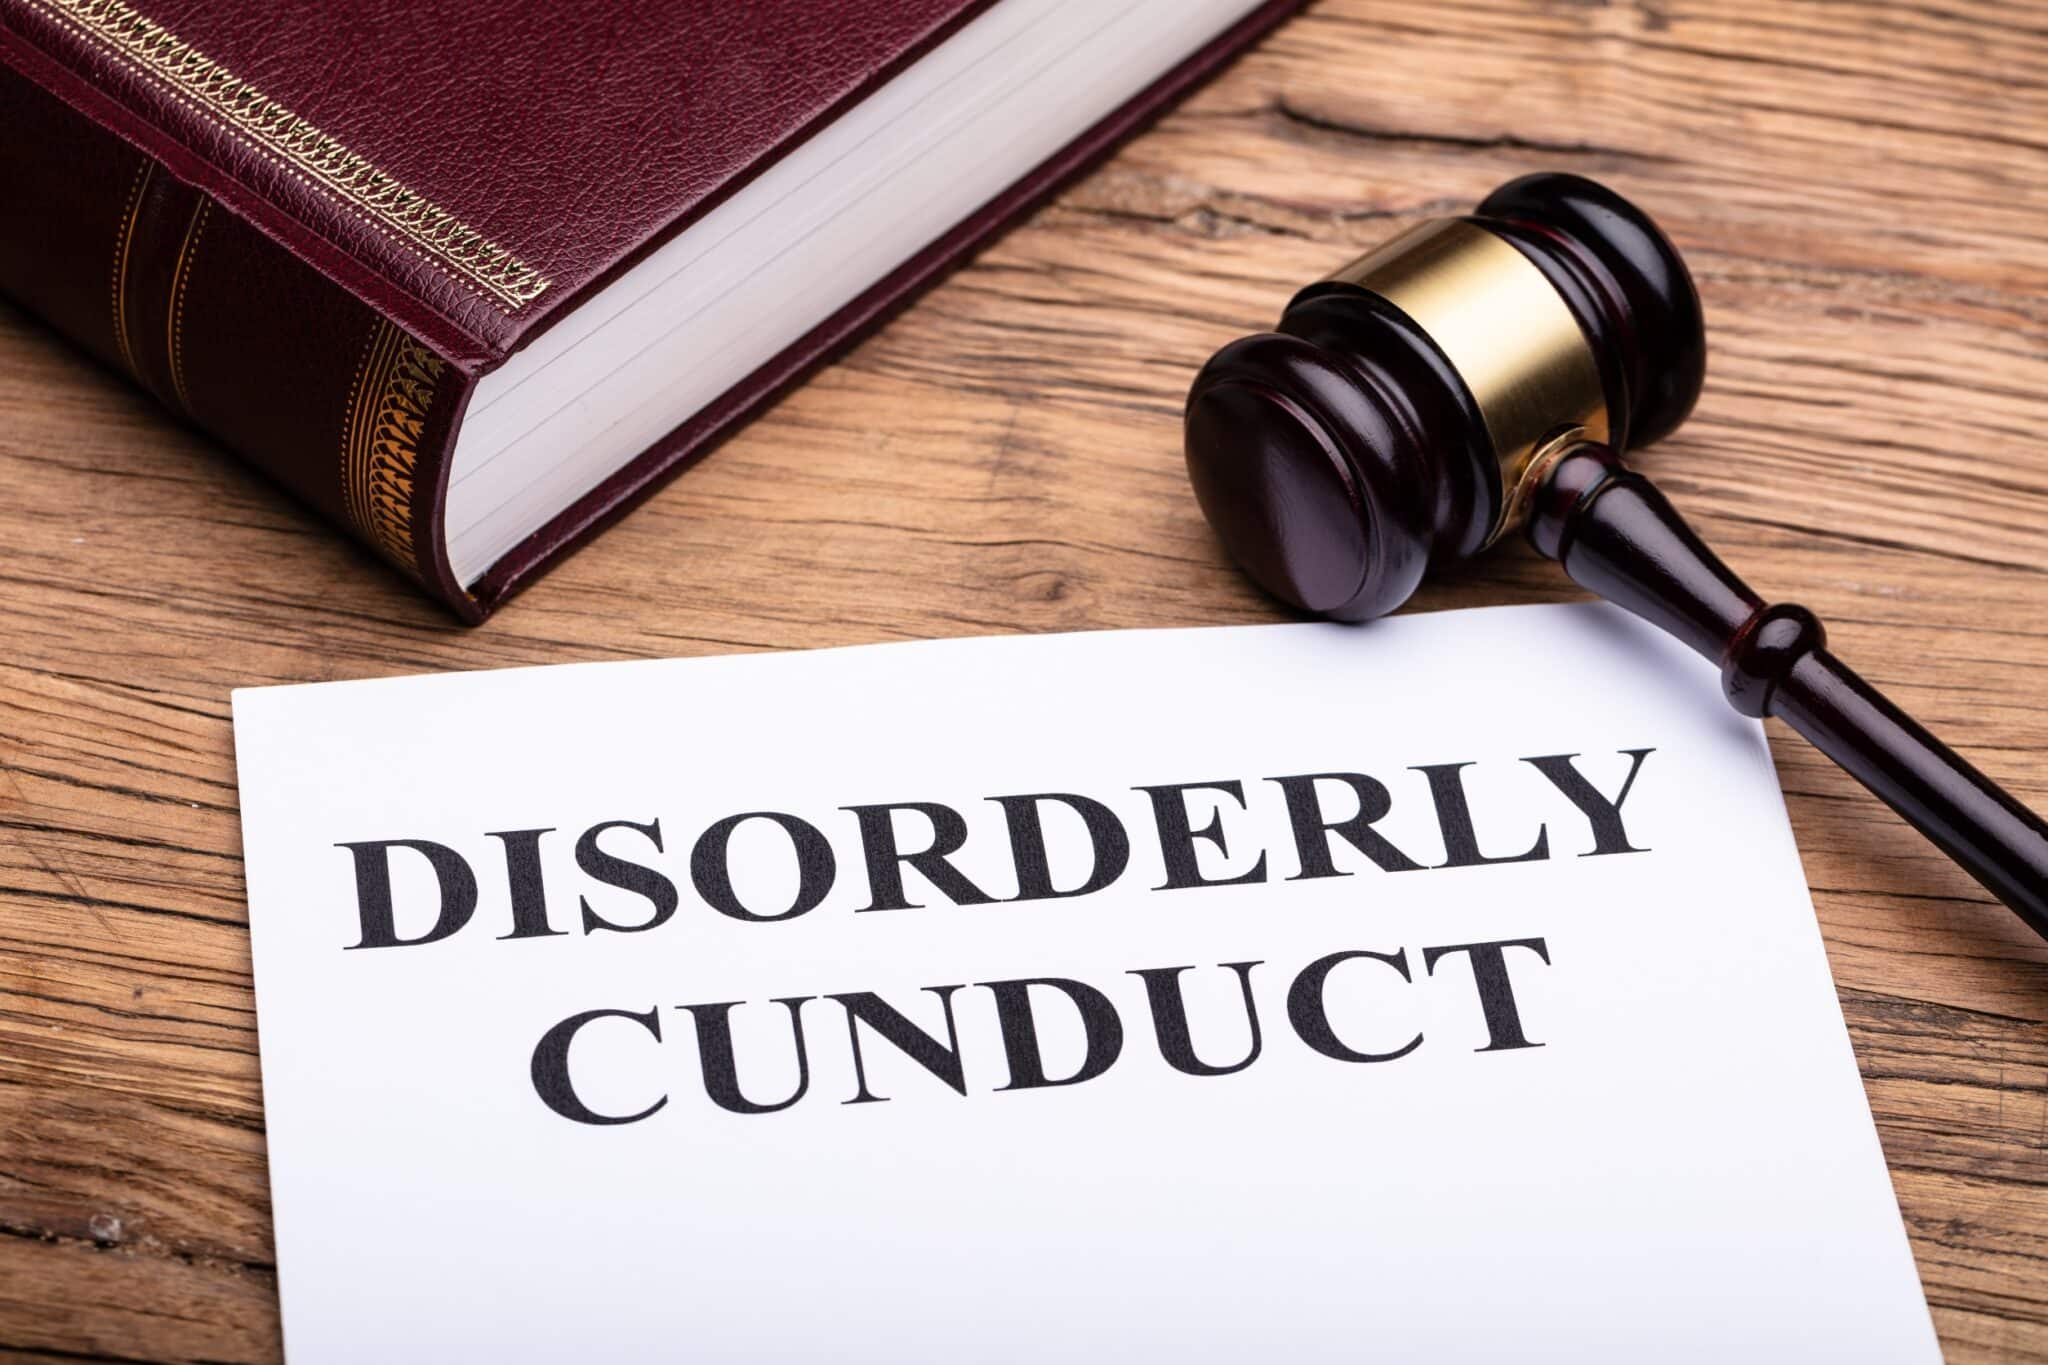 How Are Disorderly Conduct Charges Defended?